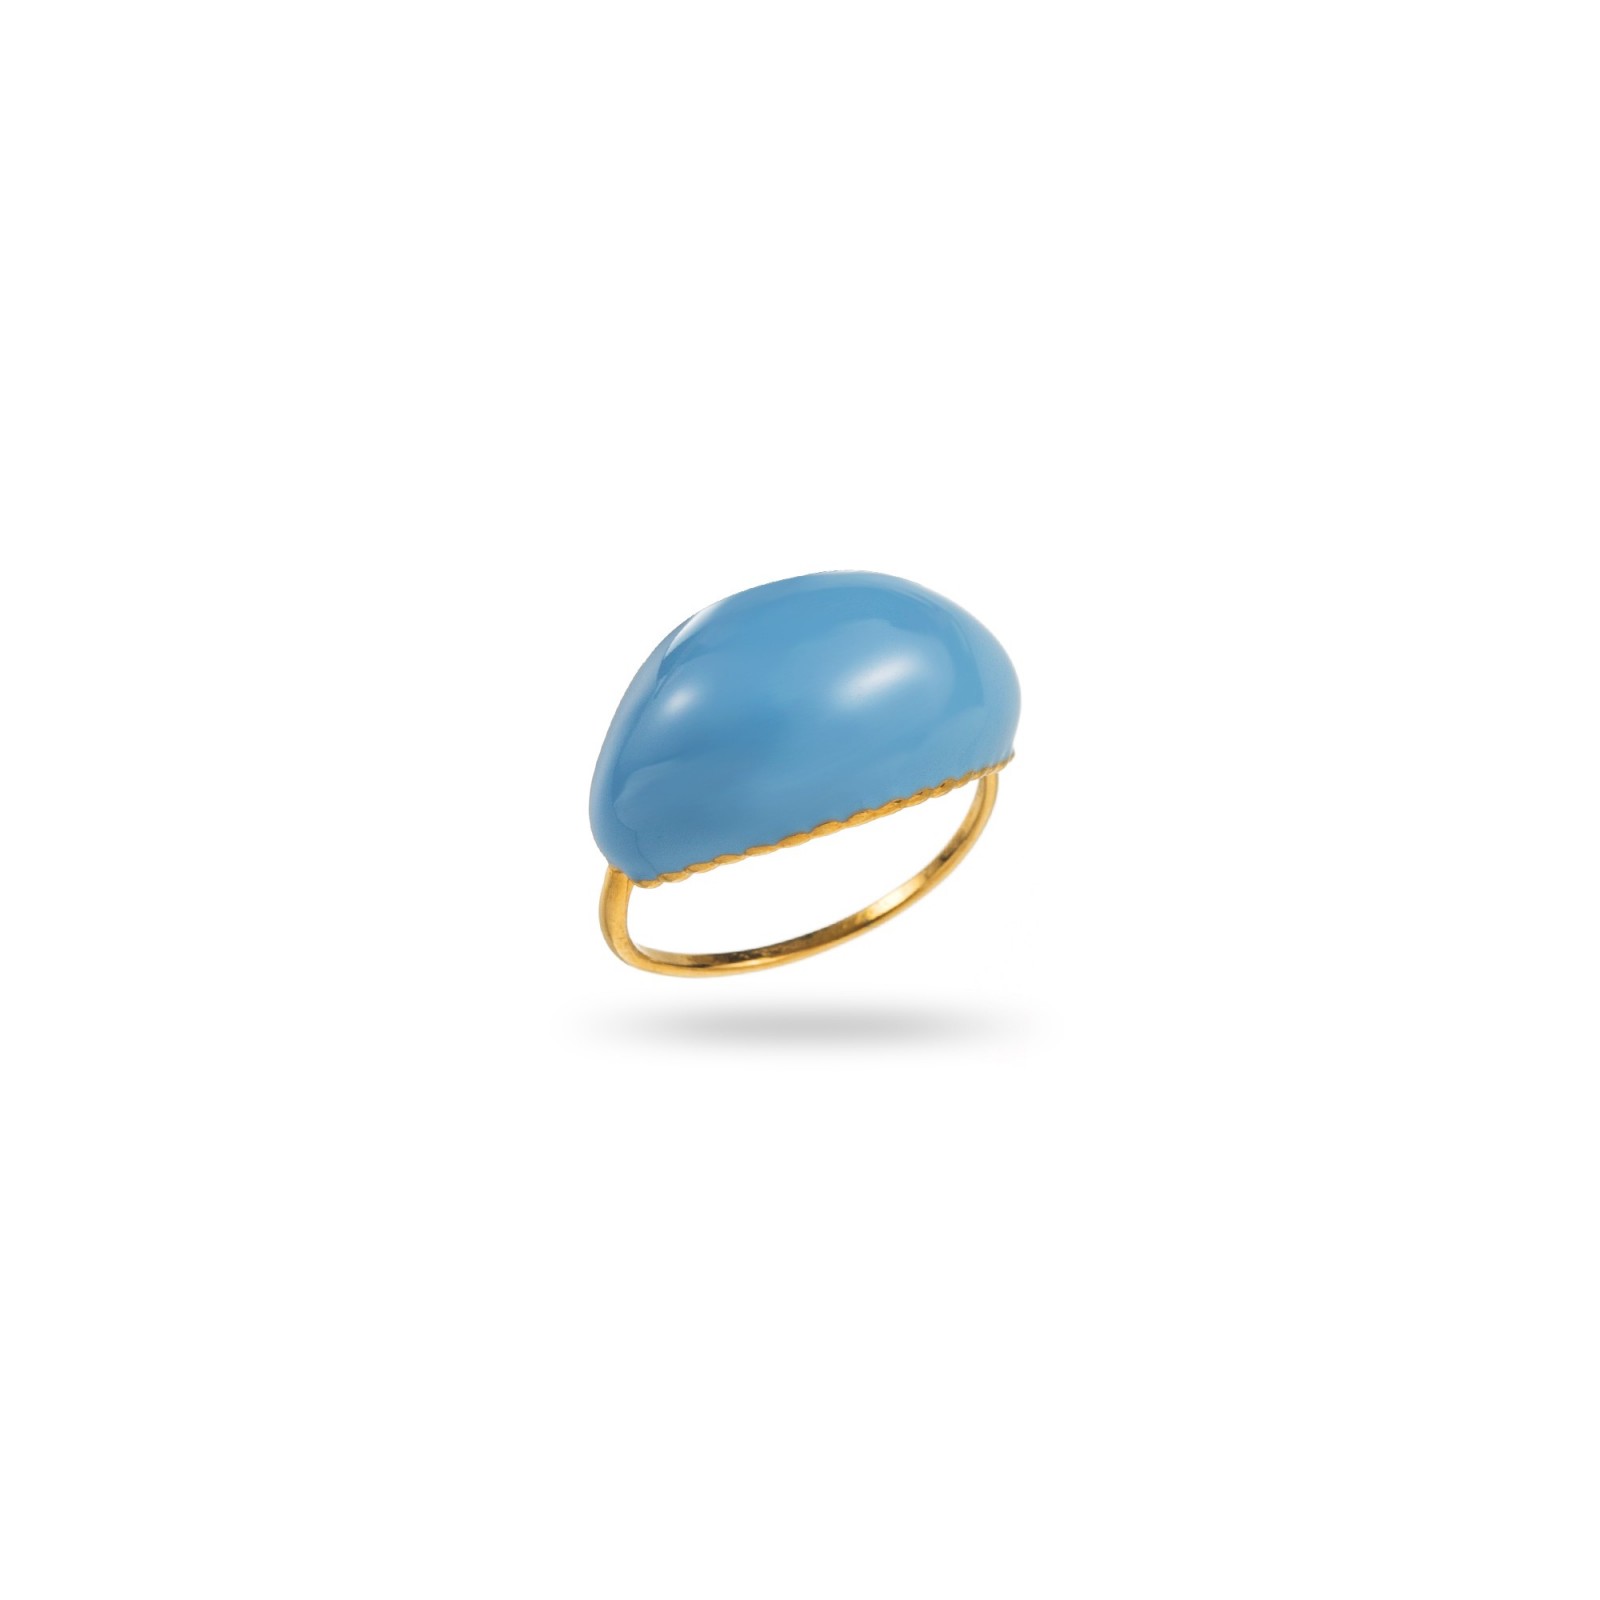 Large Oval Colored Ring Color:Blue